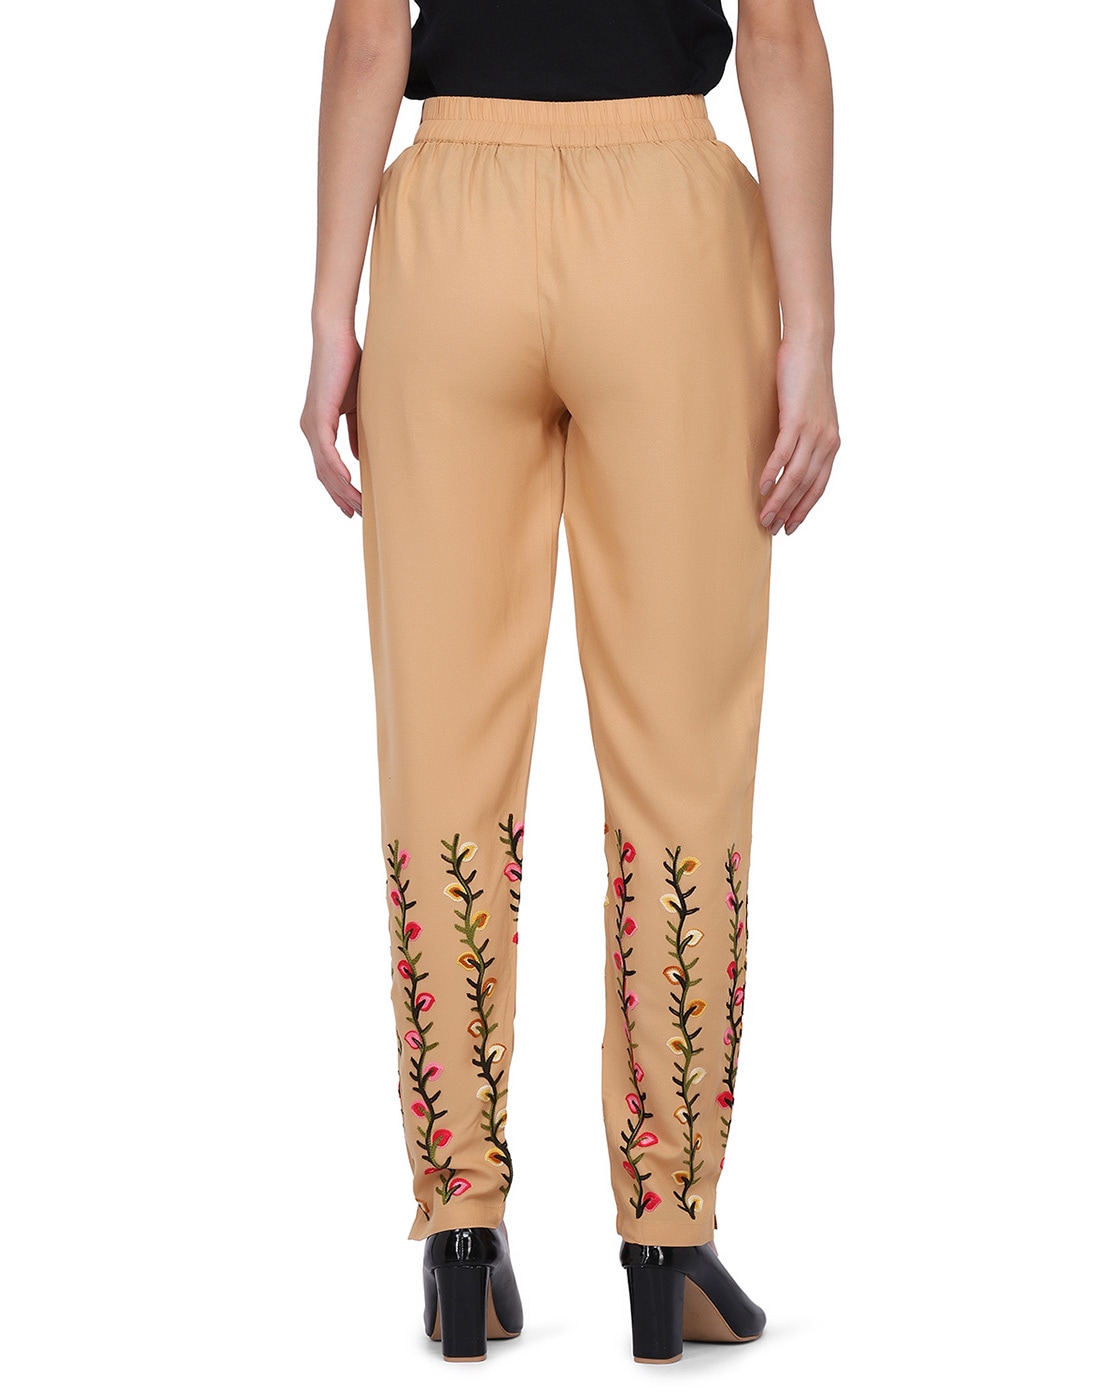 White Cotton Embroidered Pant  Buy Palazzo Pants Online